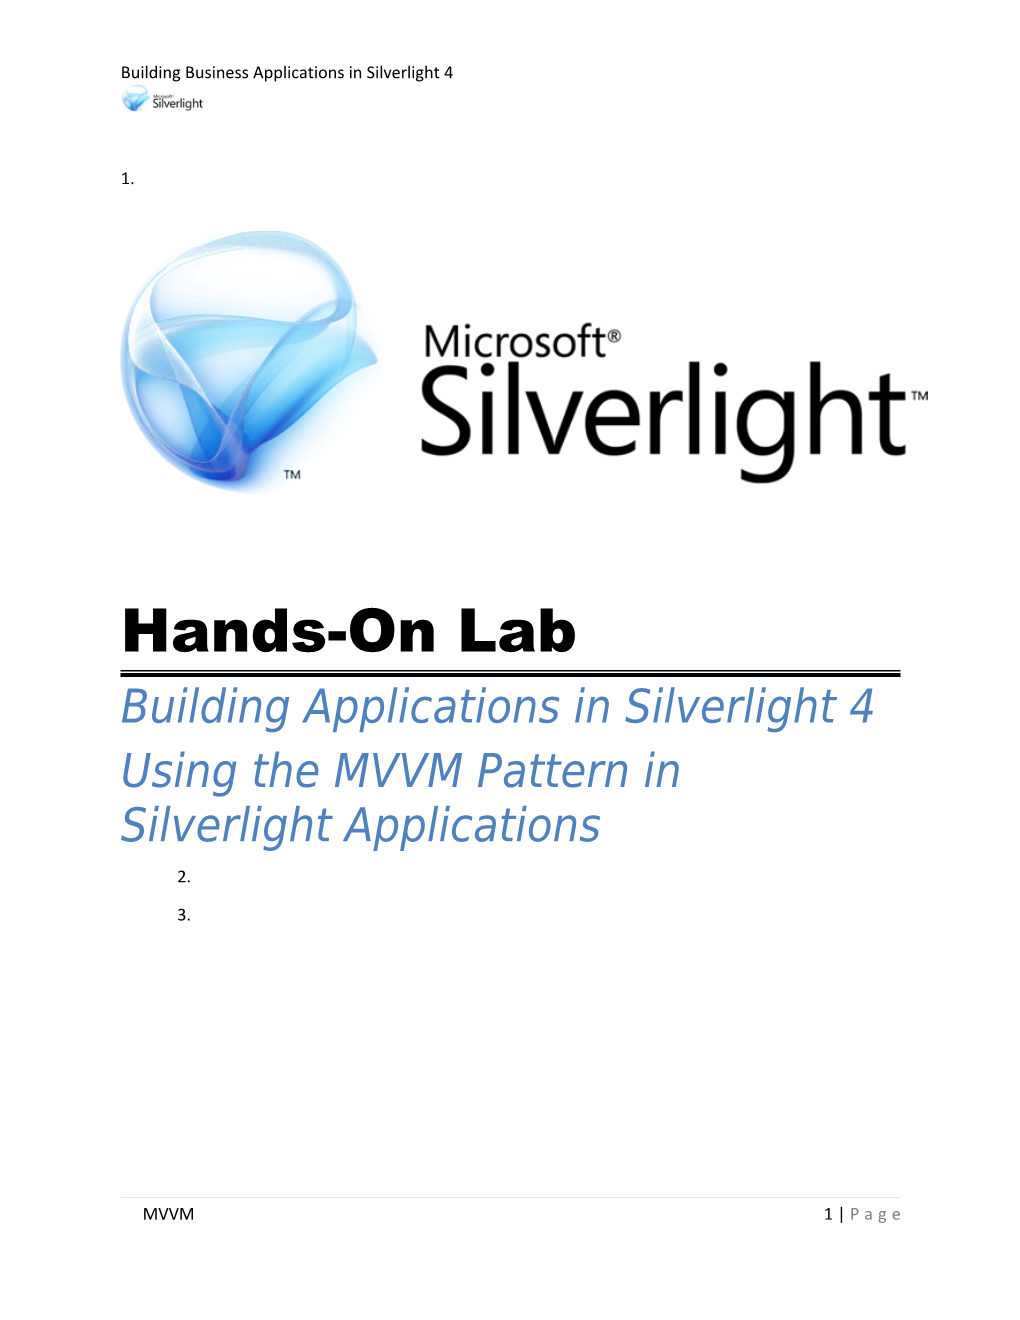 Using the MVVM Pattern in Silverlight Applications s1